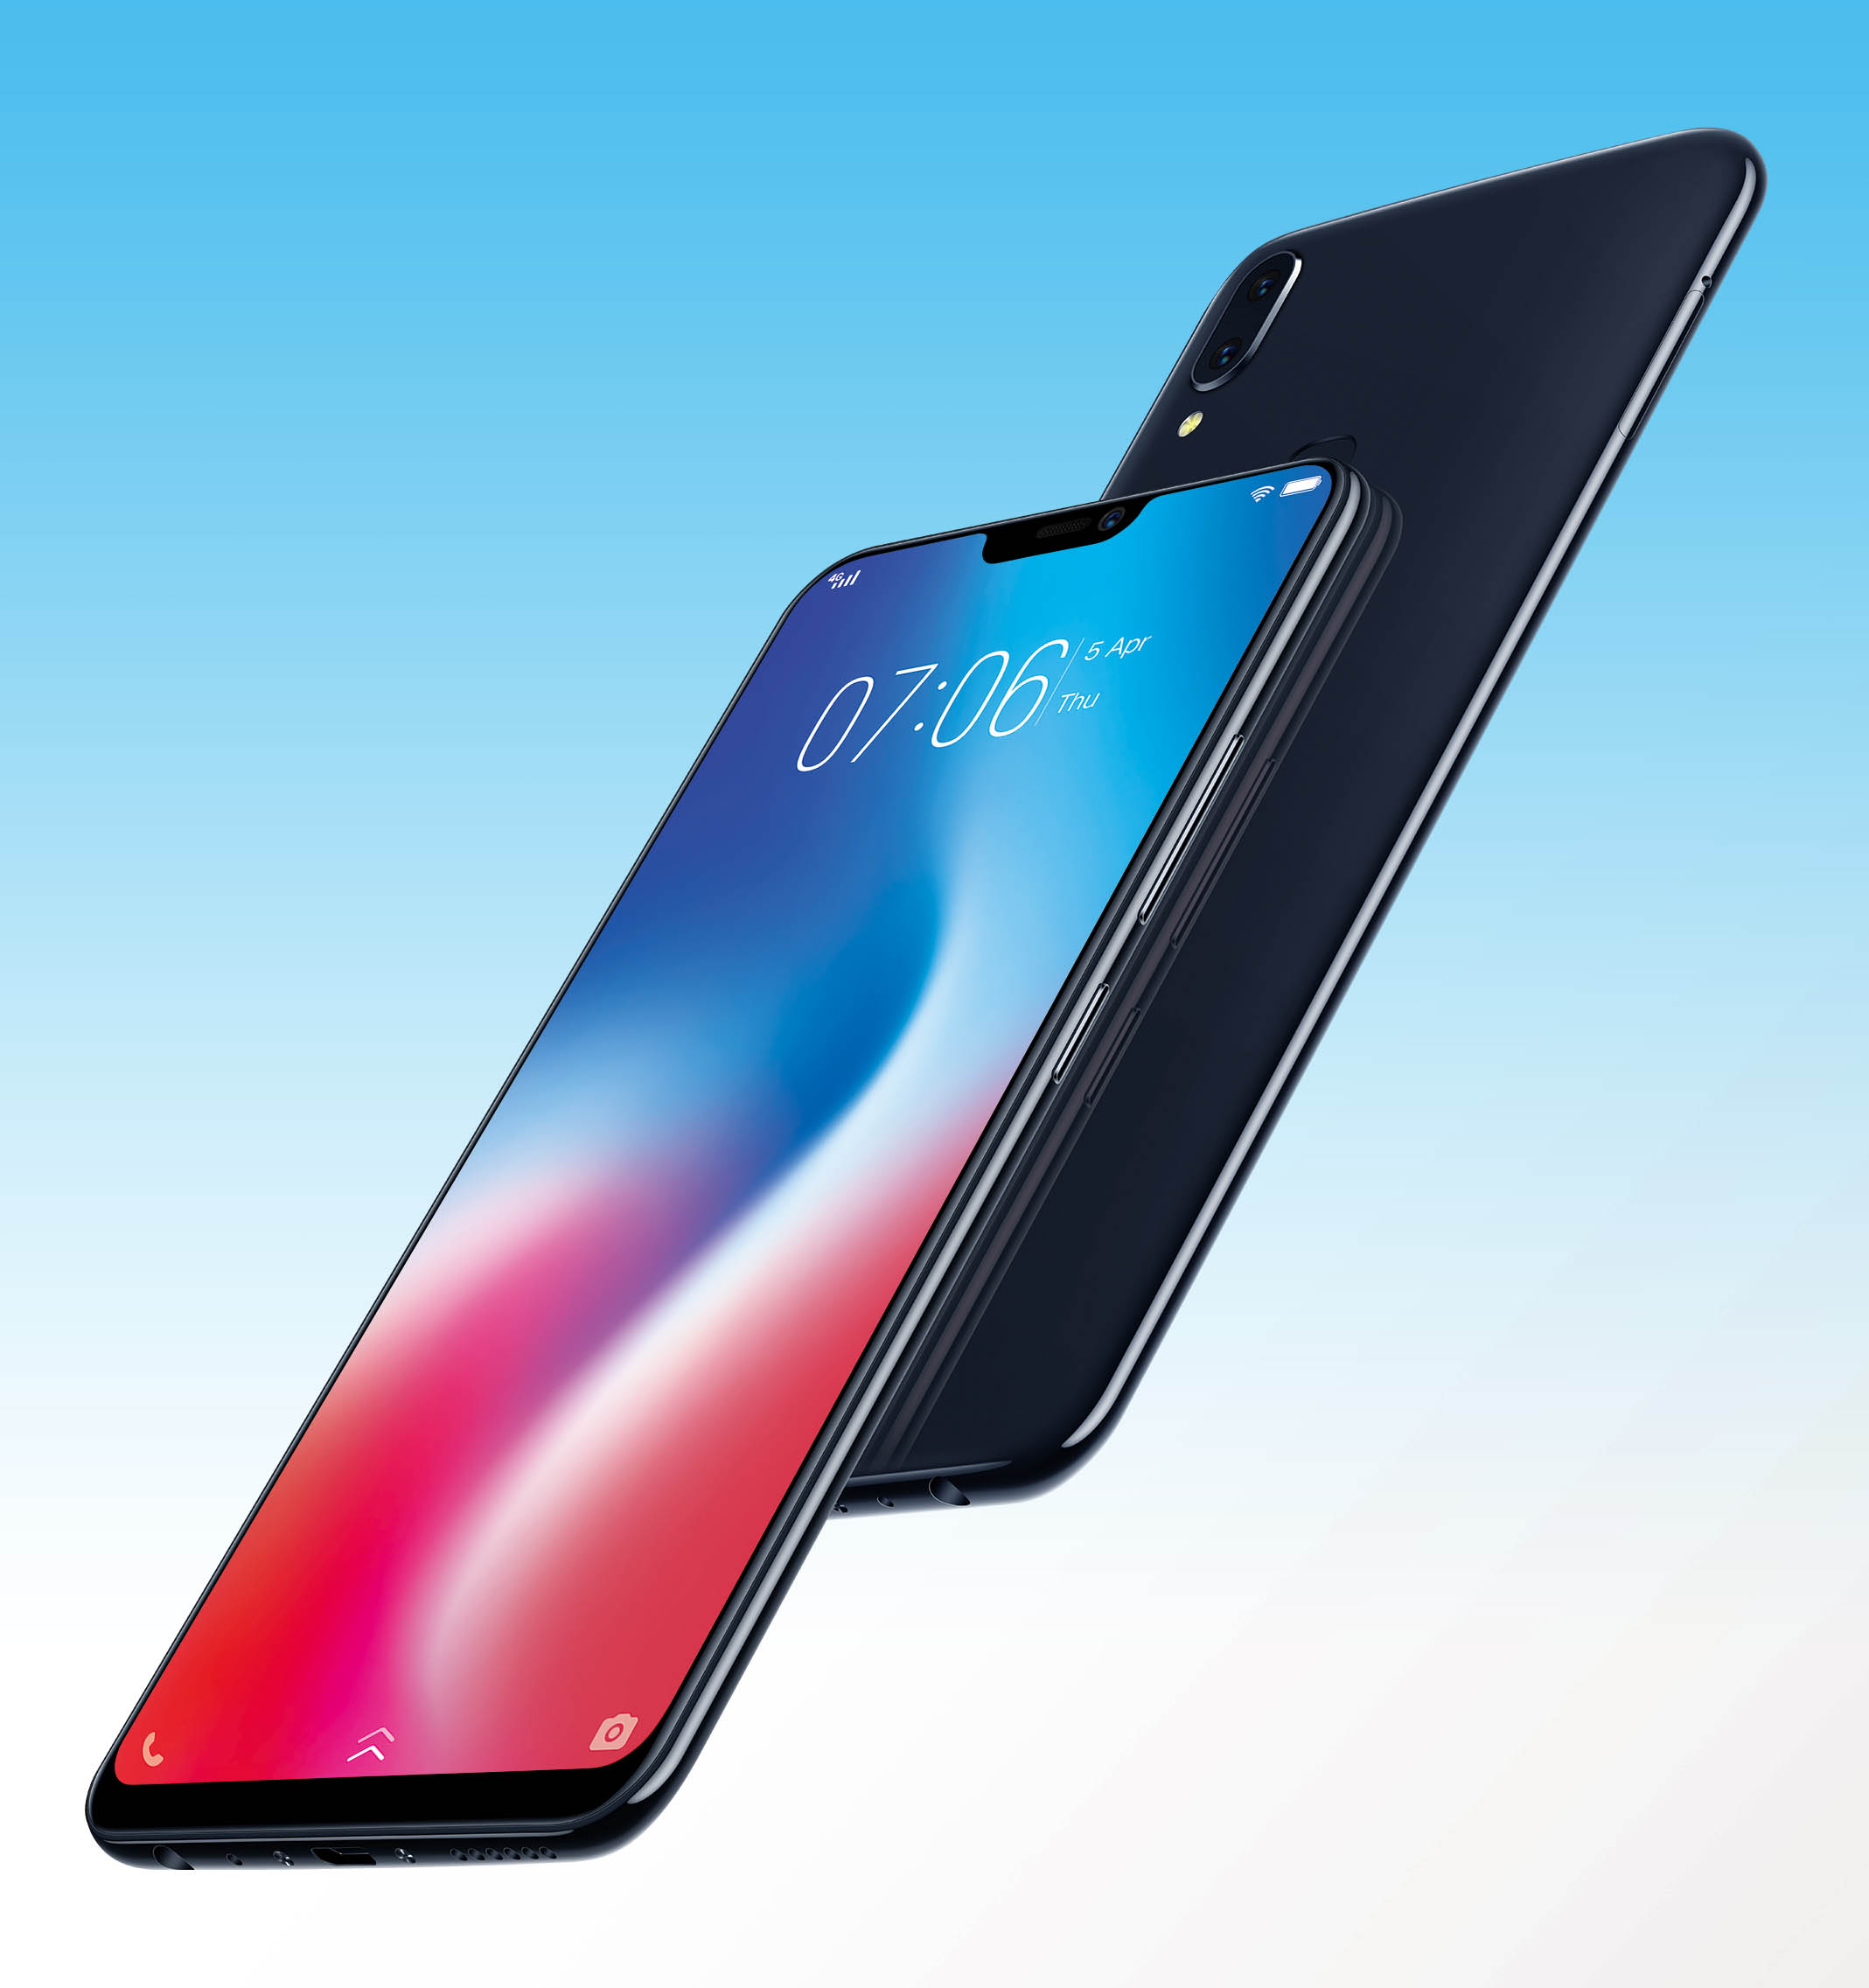 Vivo introduces perfectly-priced new flagship V9 smartphone